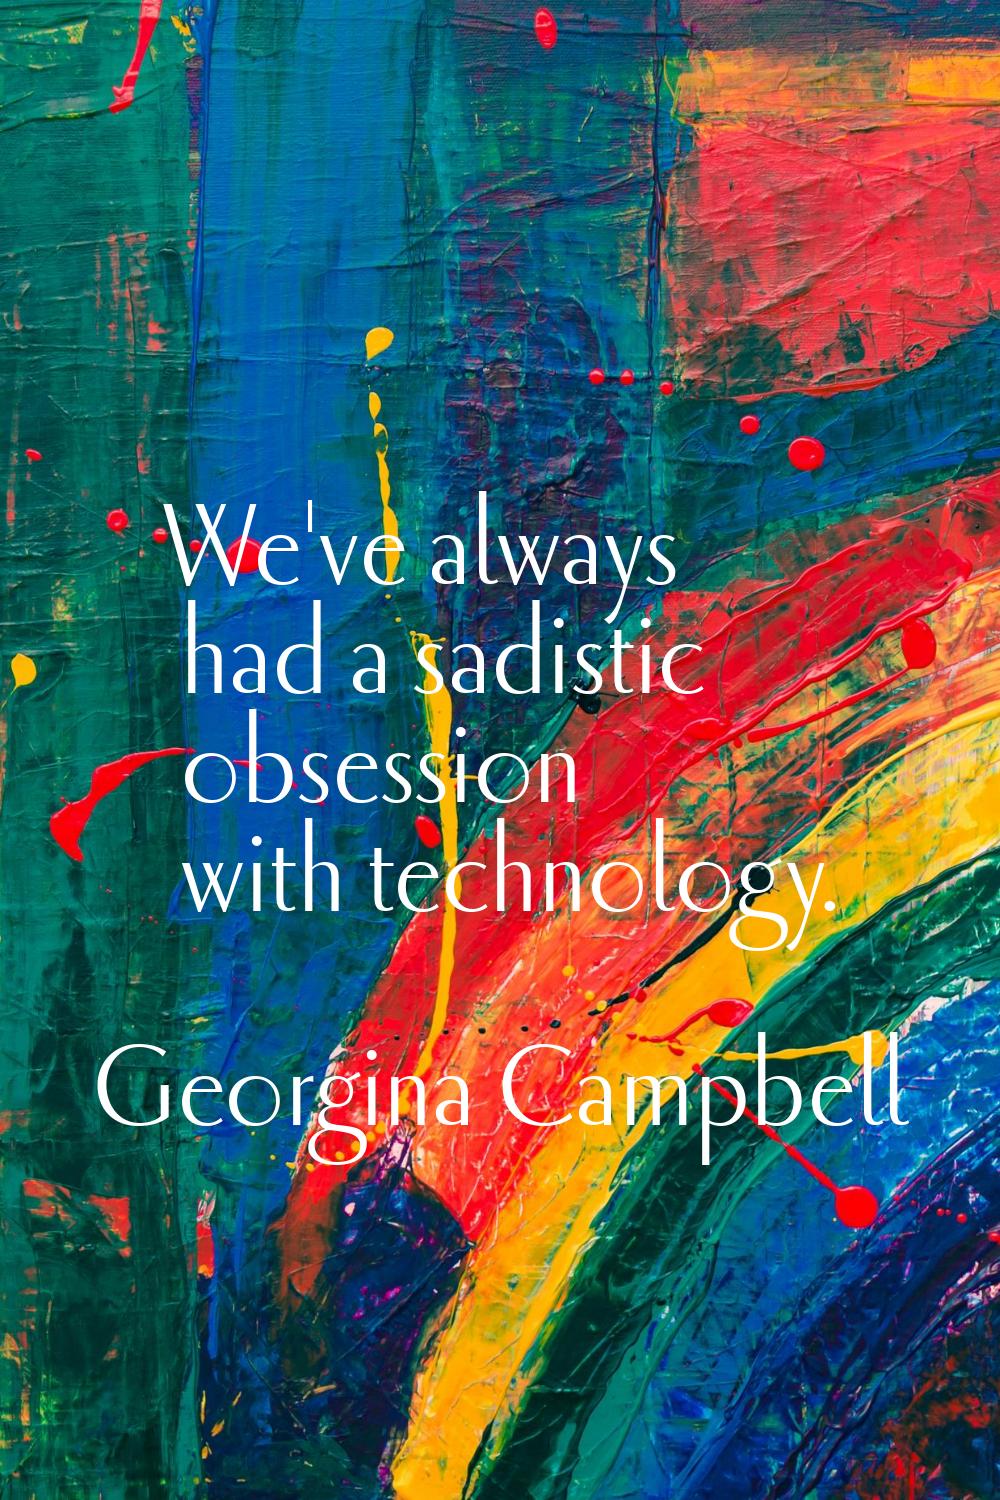 We've always had a sadistic obsession with technology.